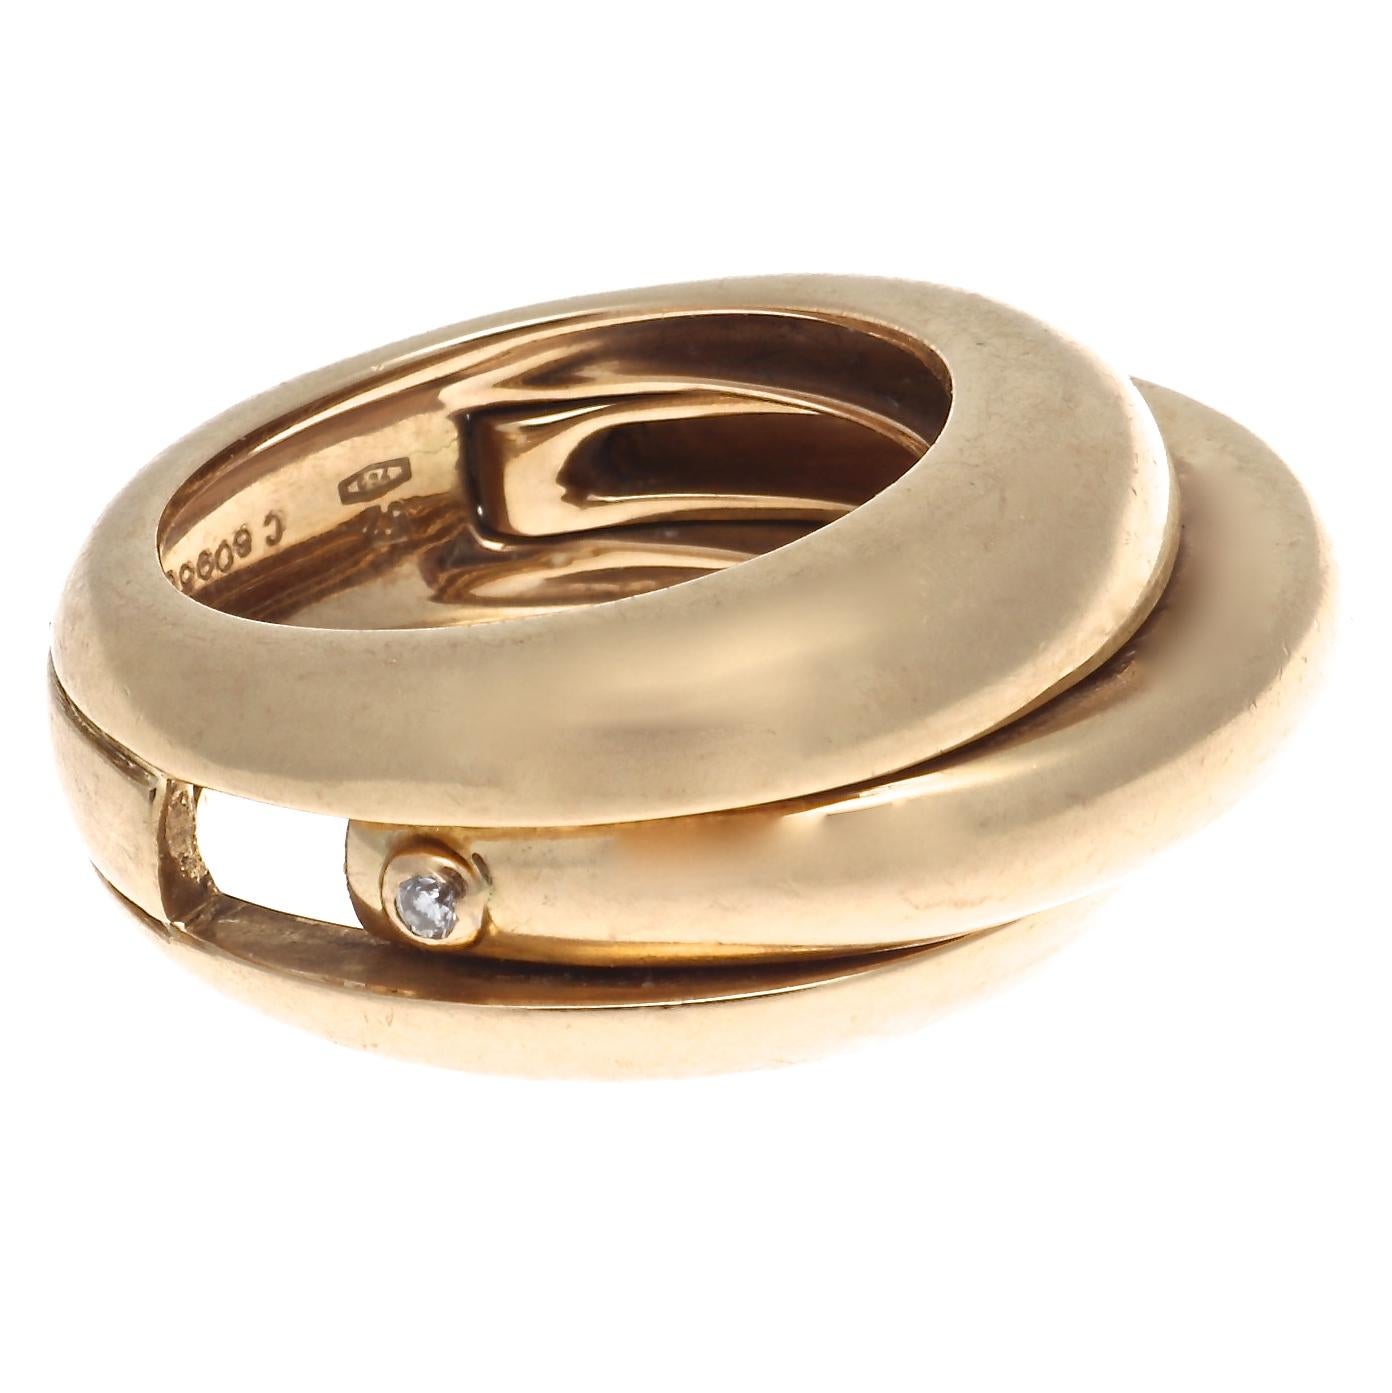 A truly unique gold ring from the iconic house of Cartier. We've all seen the Trinity and Love rings by Cartier, but this is truly a rare find. We don't know how many of these beauties were made but I'm guessing the number pales in comparison to the